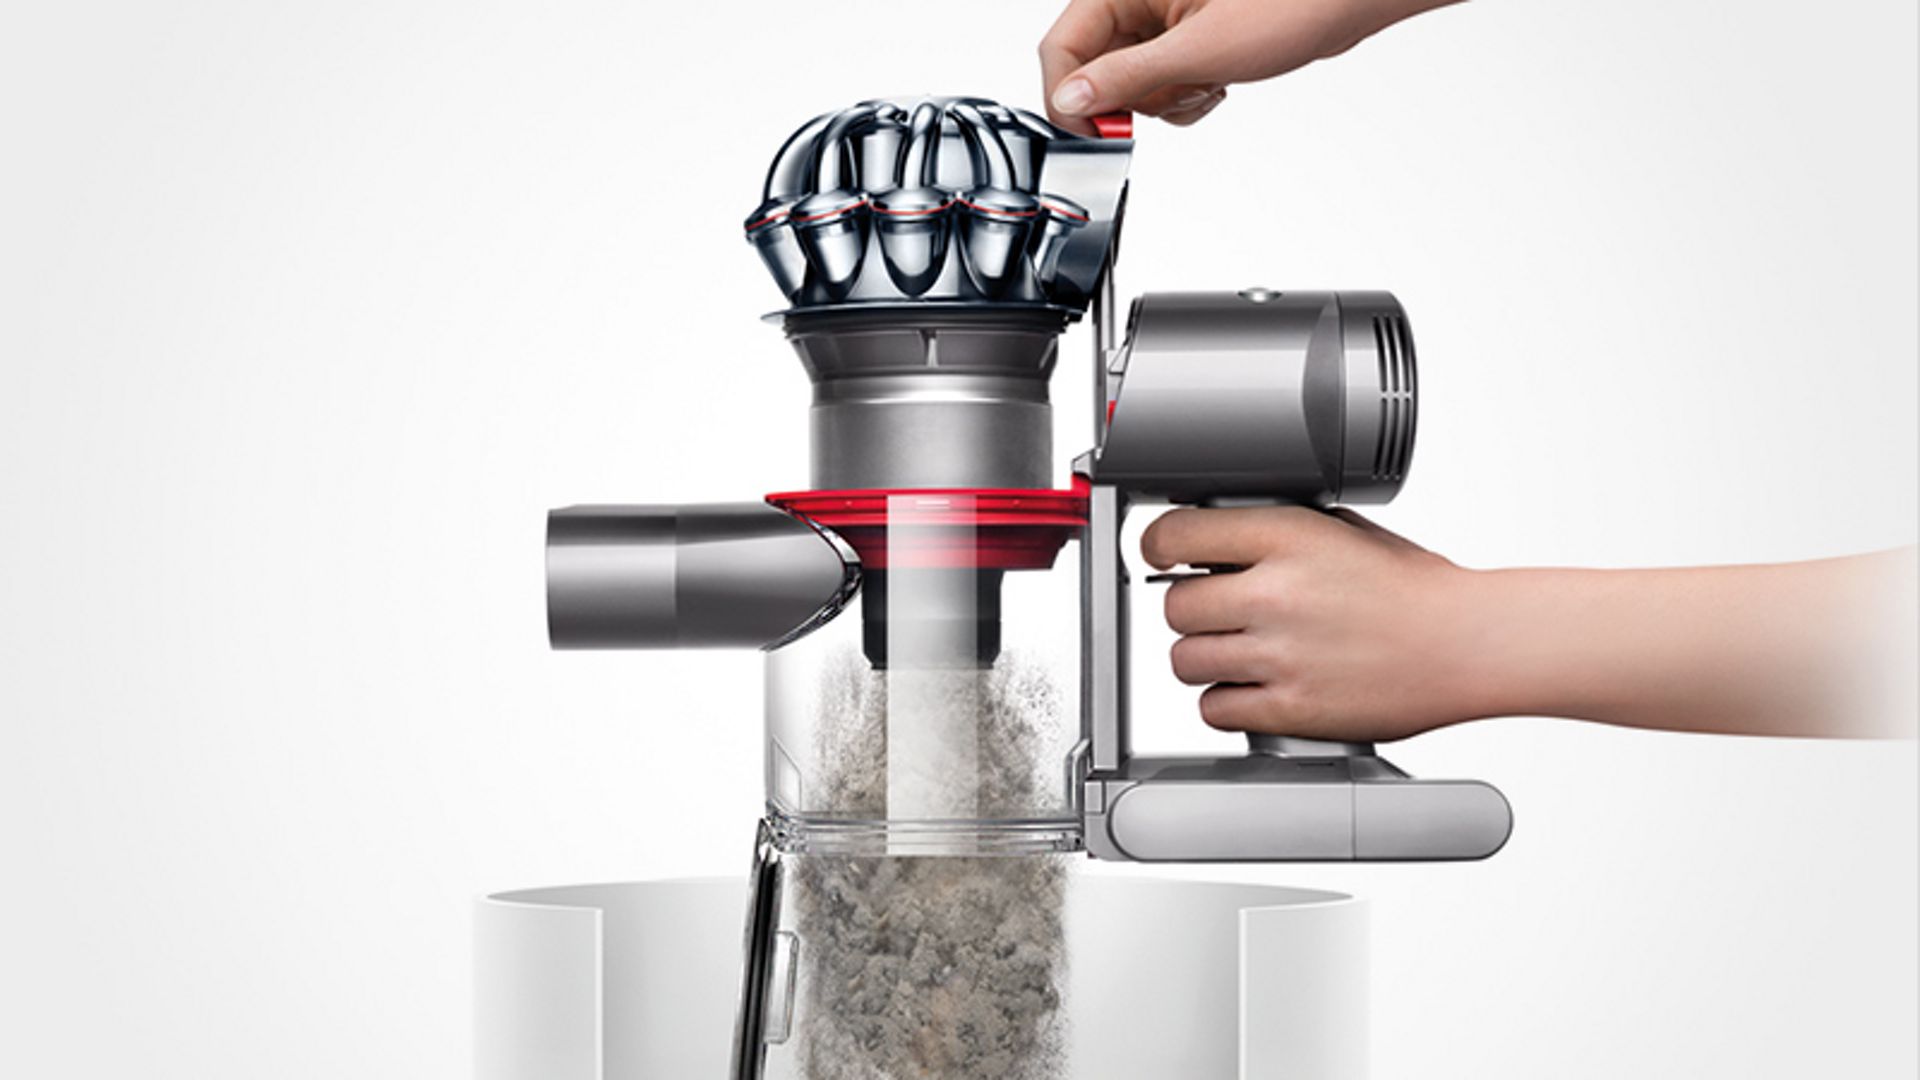 See the Dyson V8 Absolute vacuum's no-touch bin emptying mechanism.